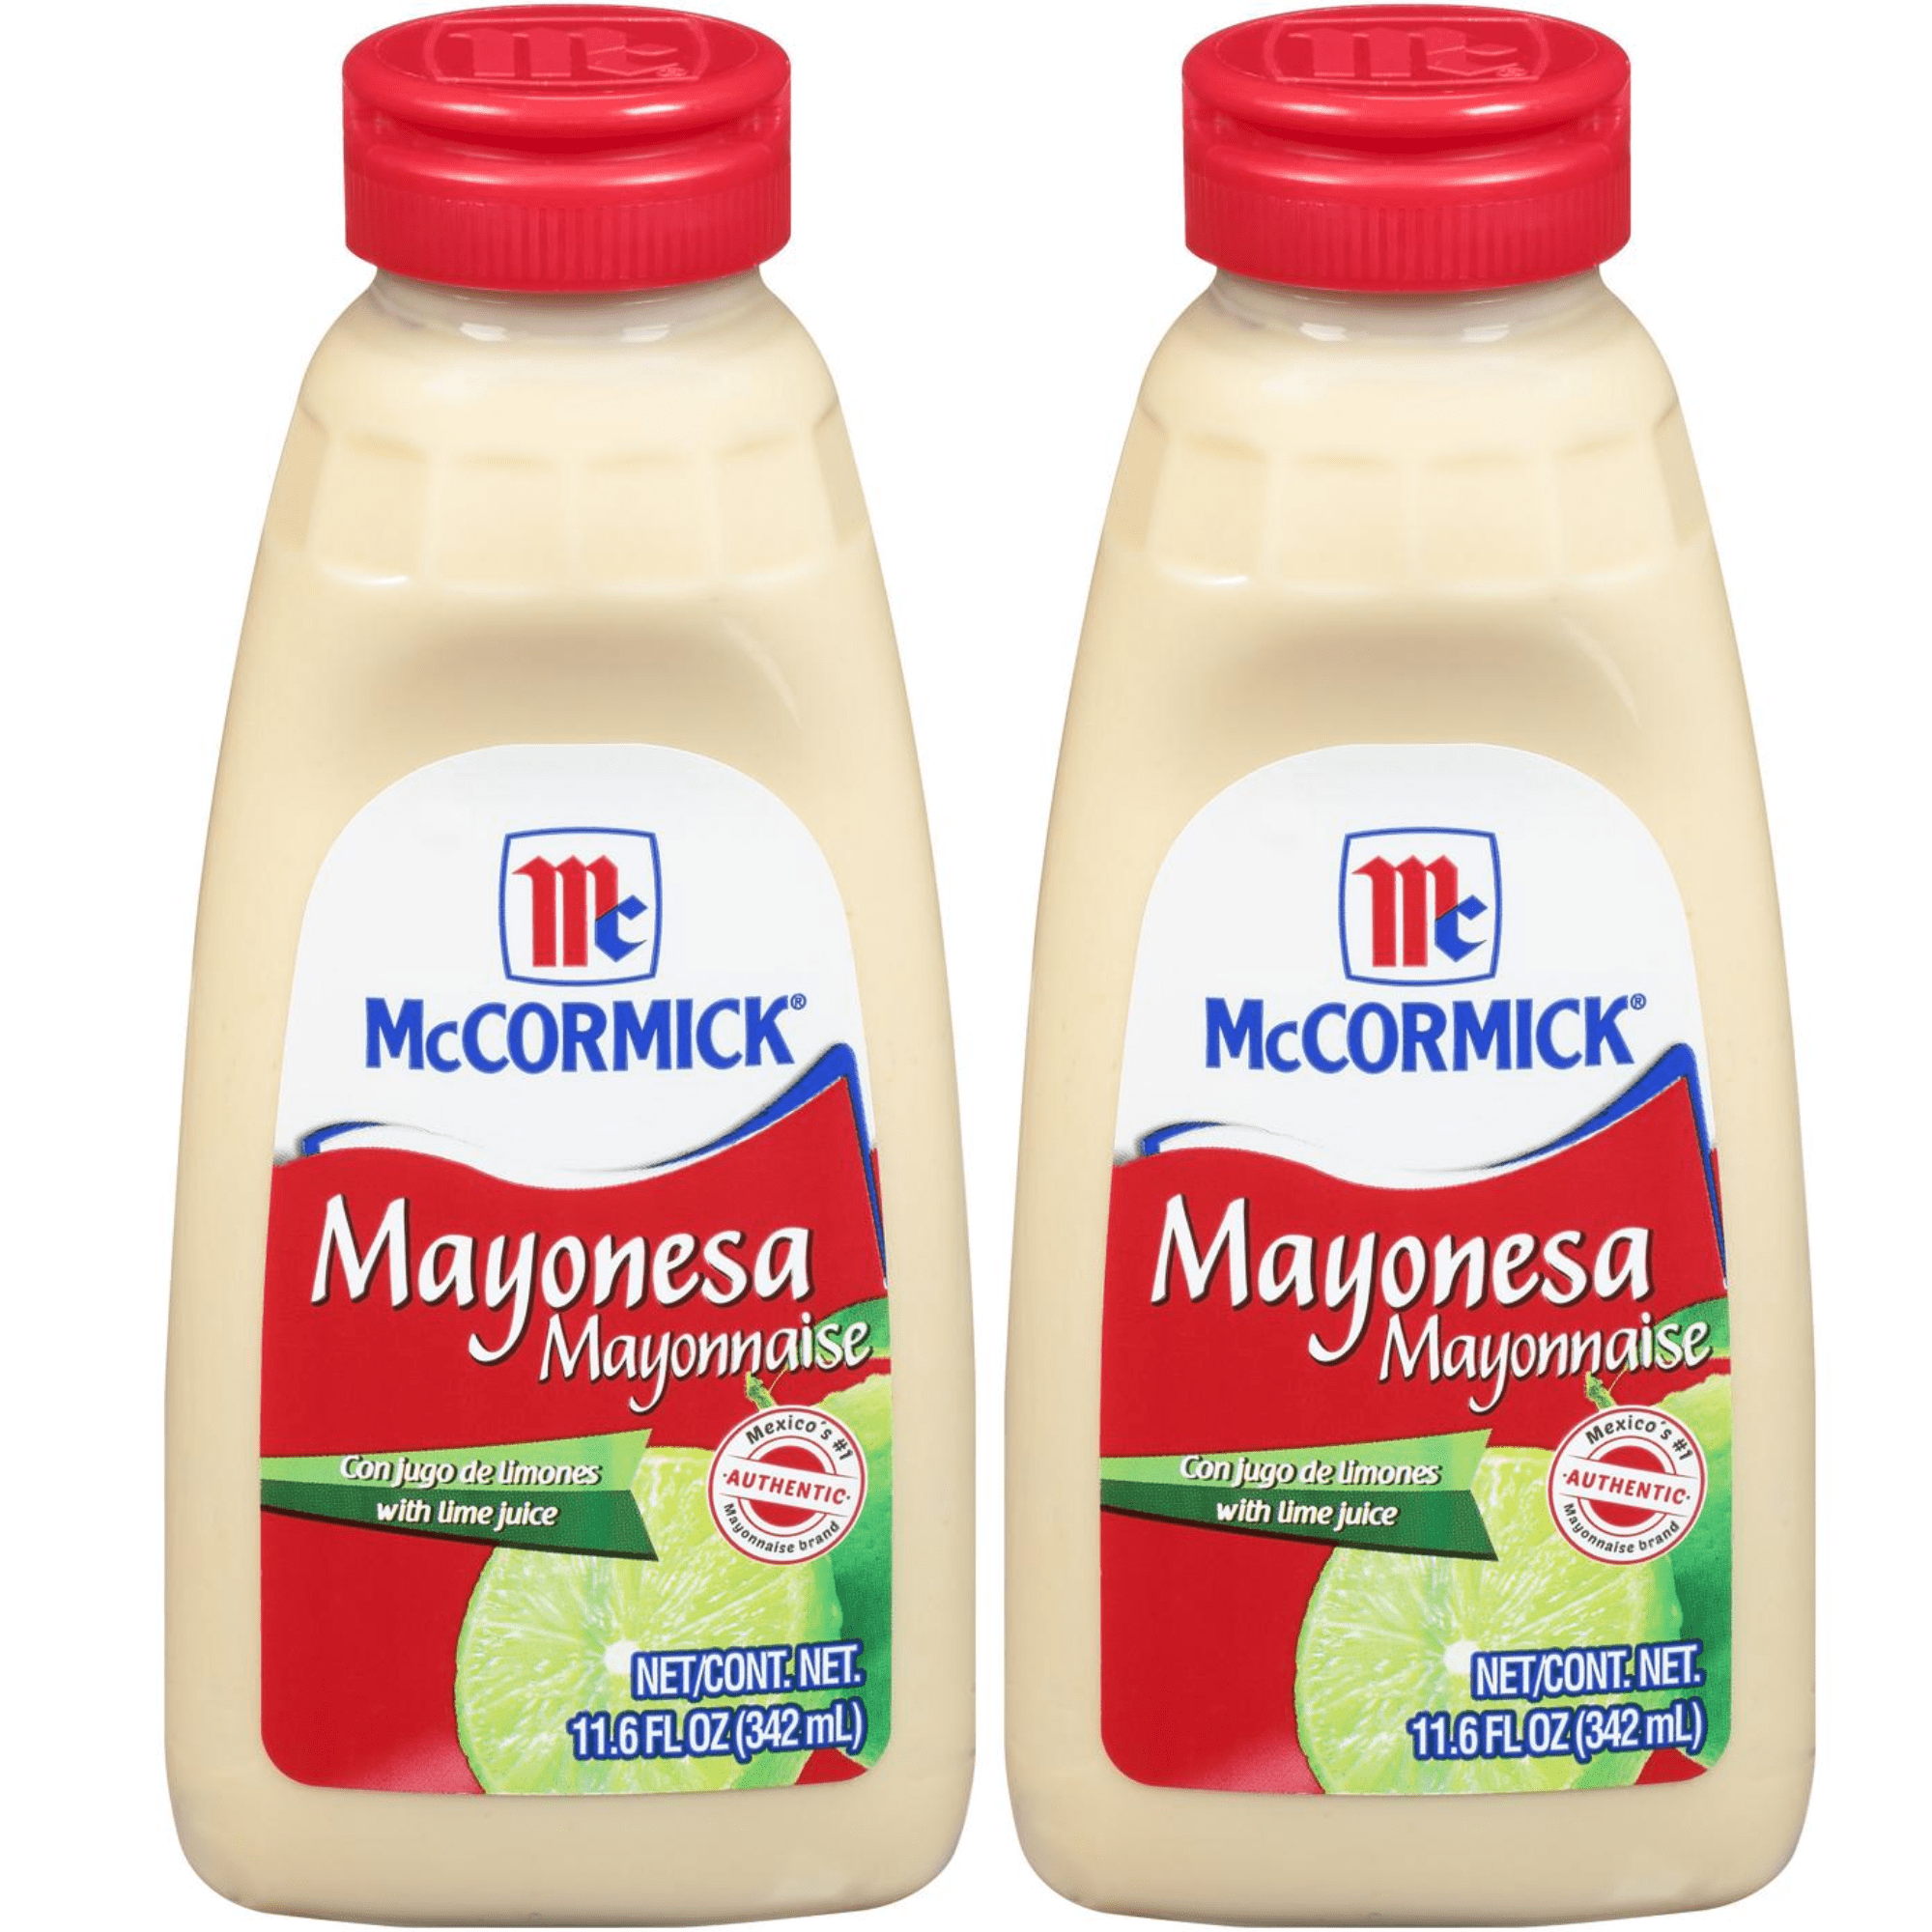 3 Squeeze Bottles McCormick Mayonesa Mayonnaise w Lime Juice 11.6